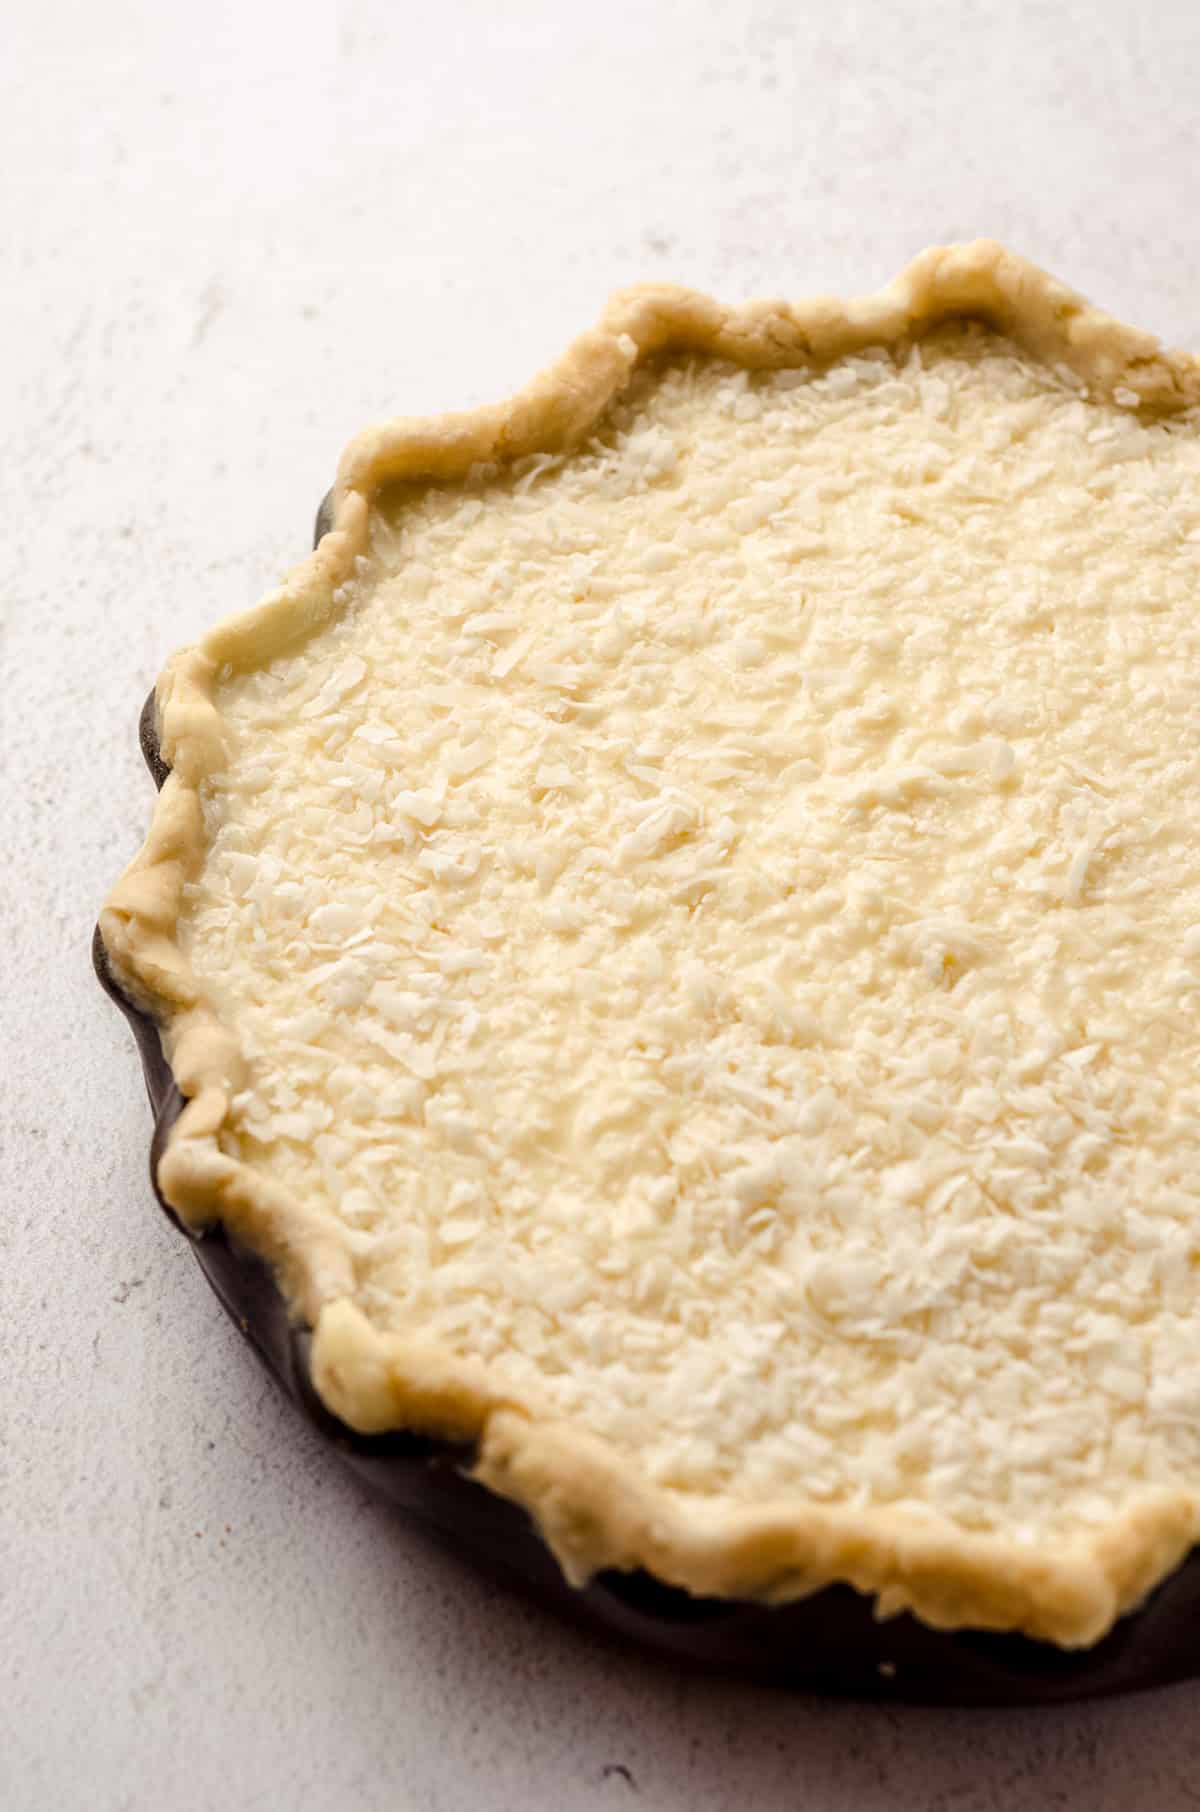 A pie crust shell filled with an unbaked custard mixture, as well as shredded coconut.